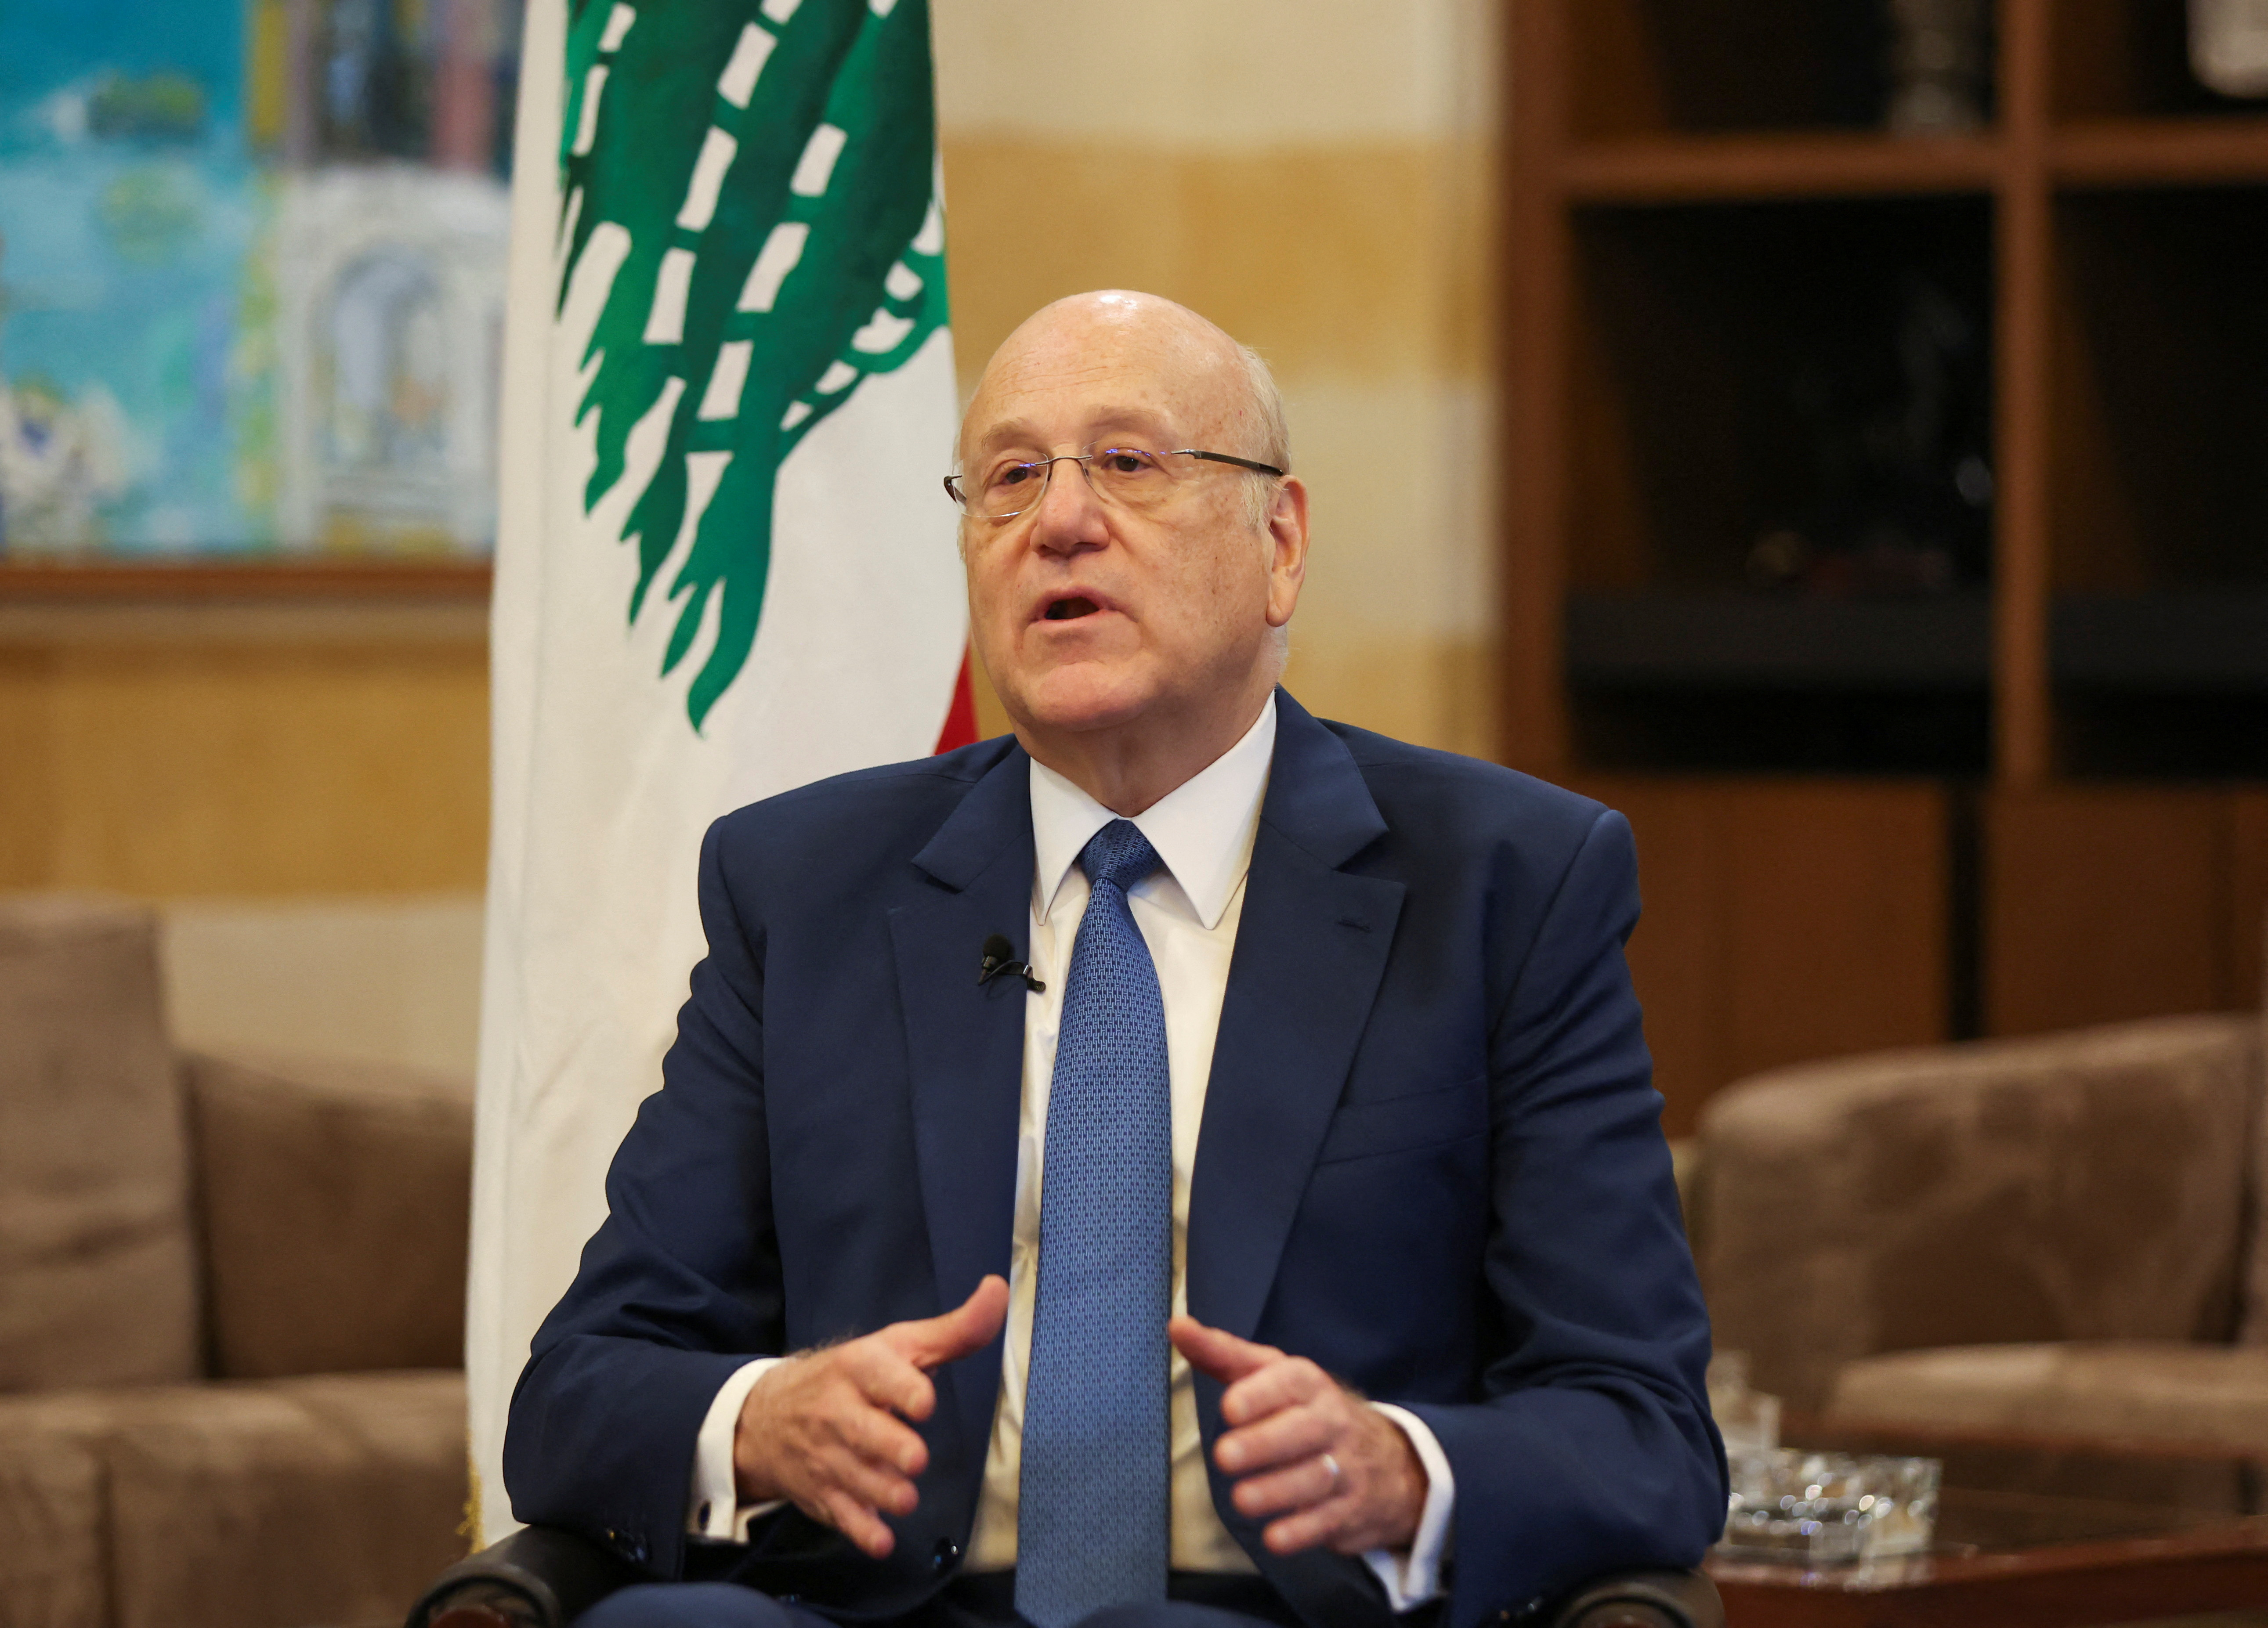 Lebanon's caretaker Prime Minister Najib Mikati gestures as he attends an interview with Reuters at the government headquarters in downtown Beirut